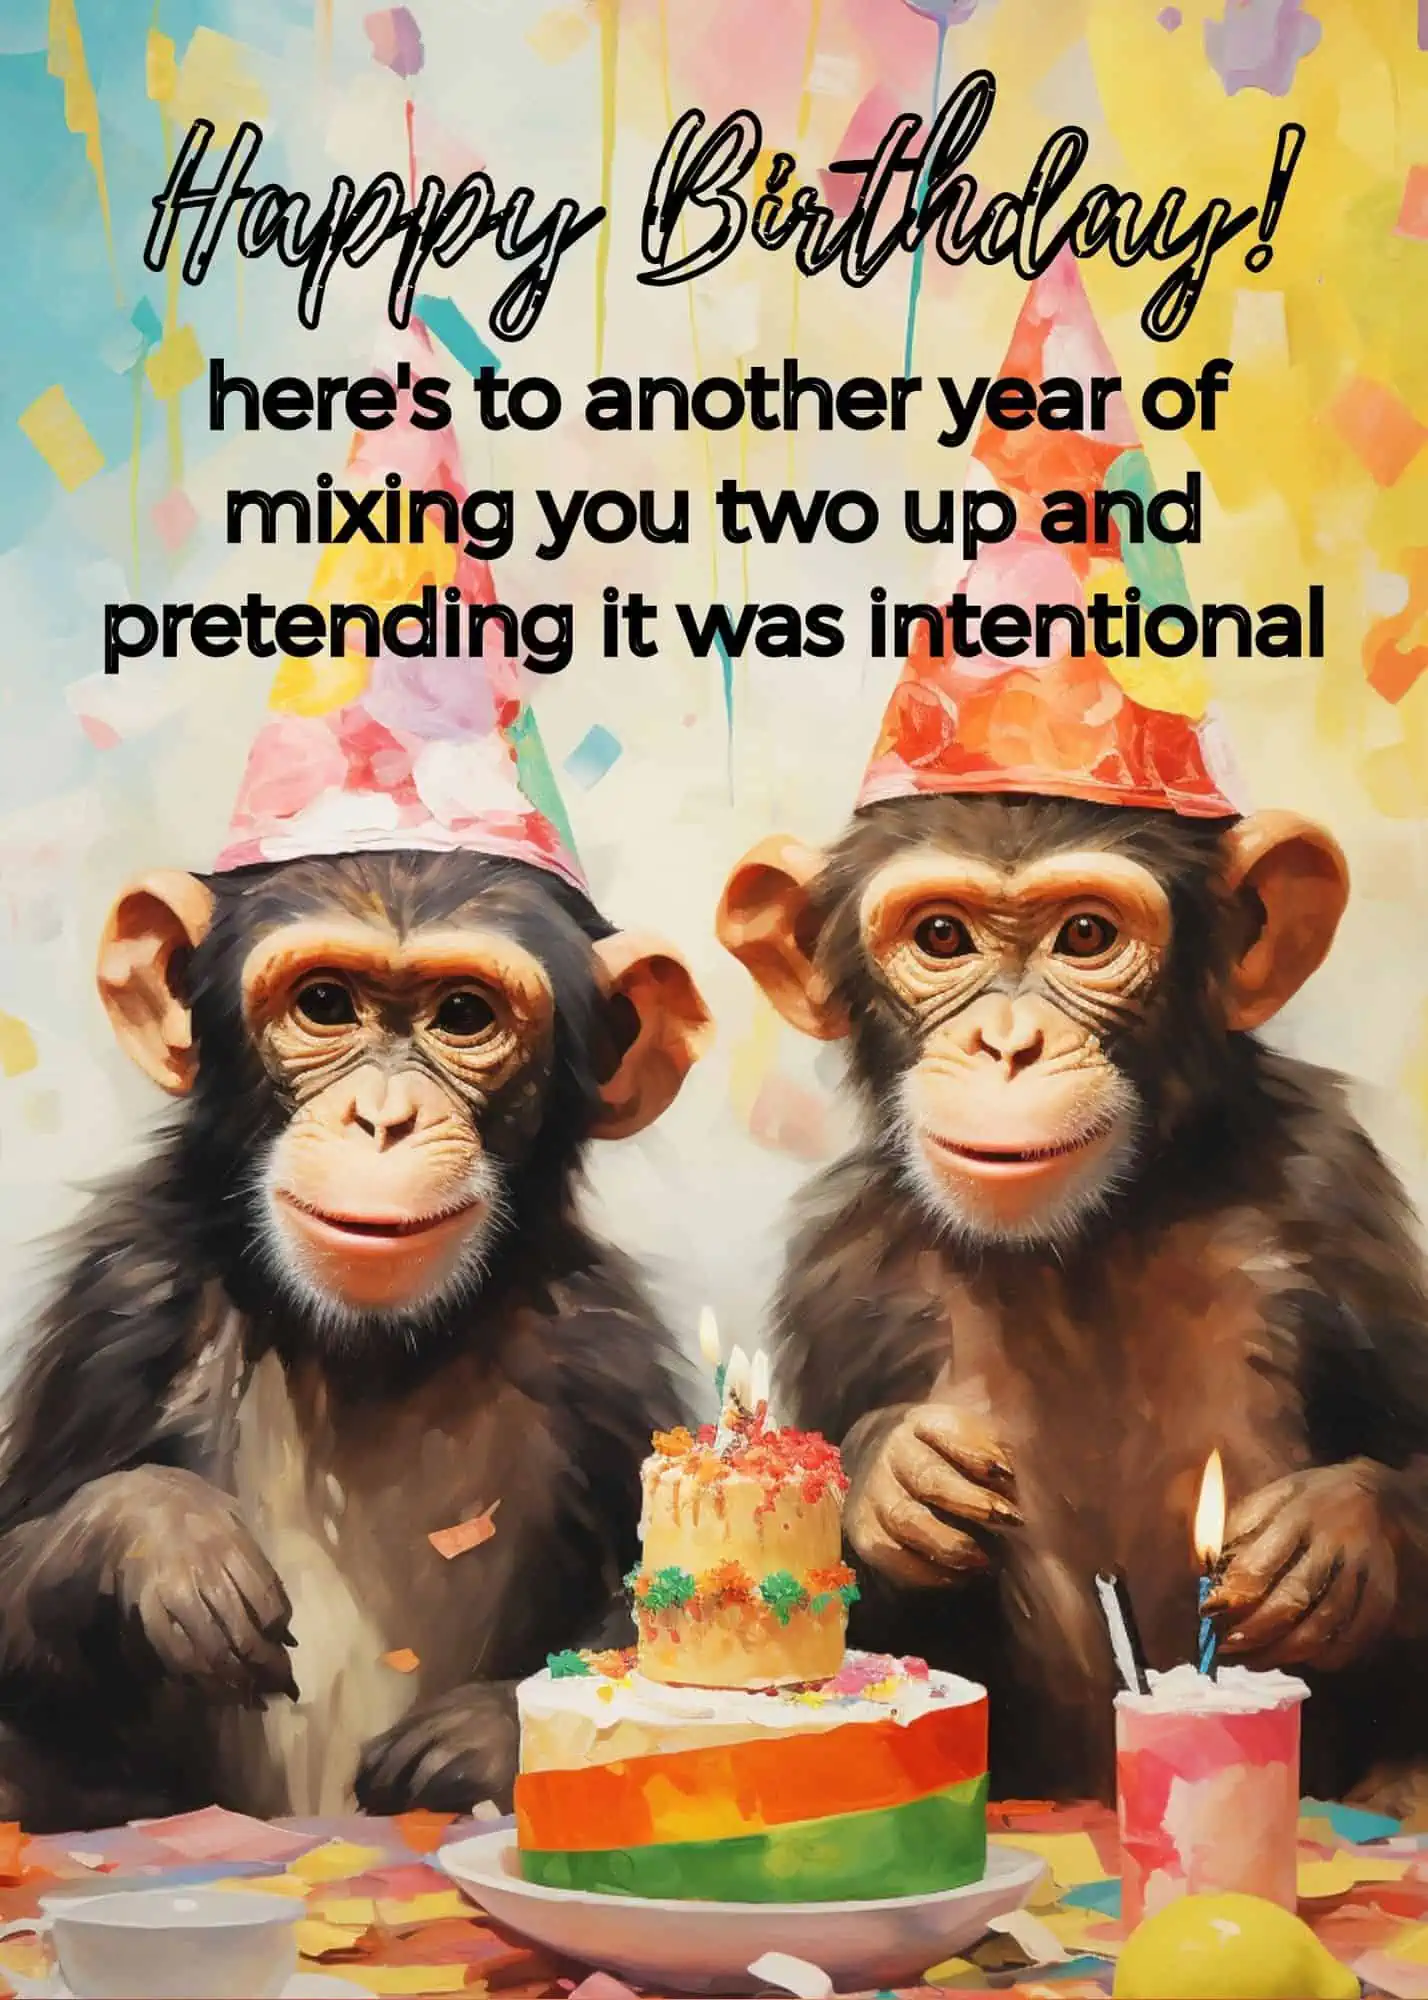 Humorous and light-hearted birthday wishes guaranteed to bring laughter to twins.